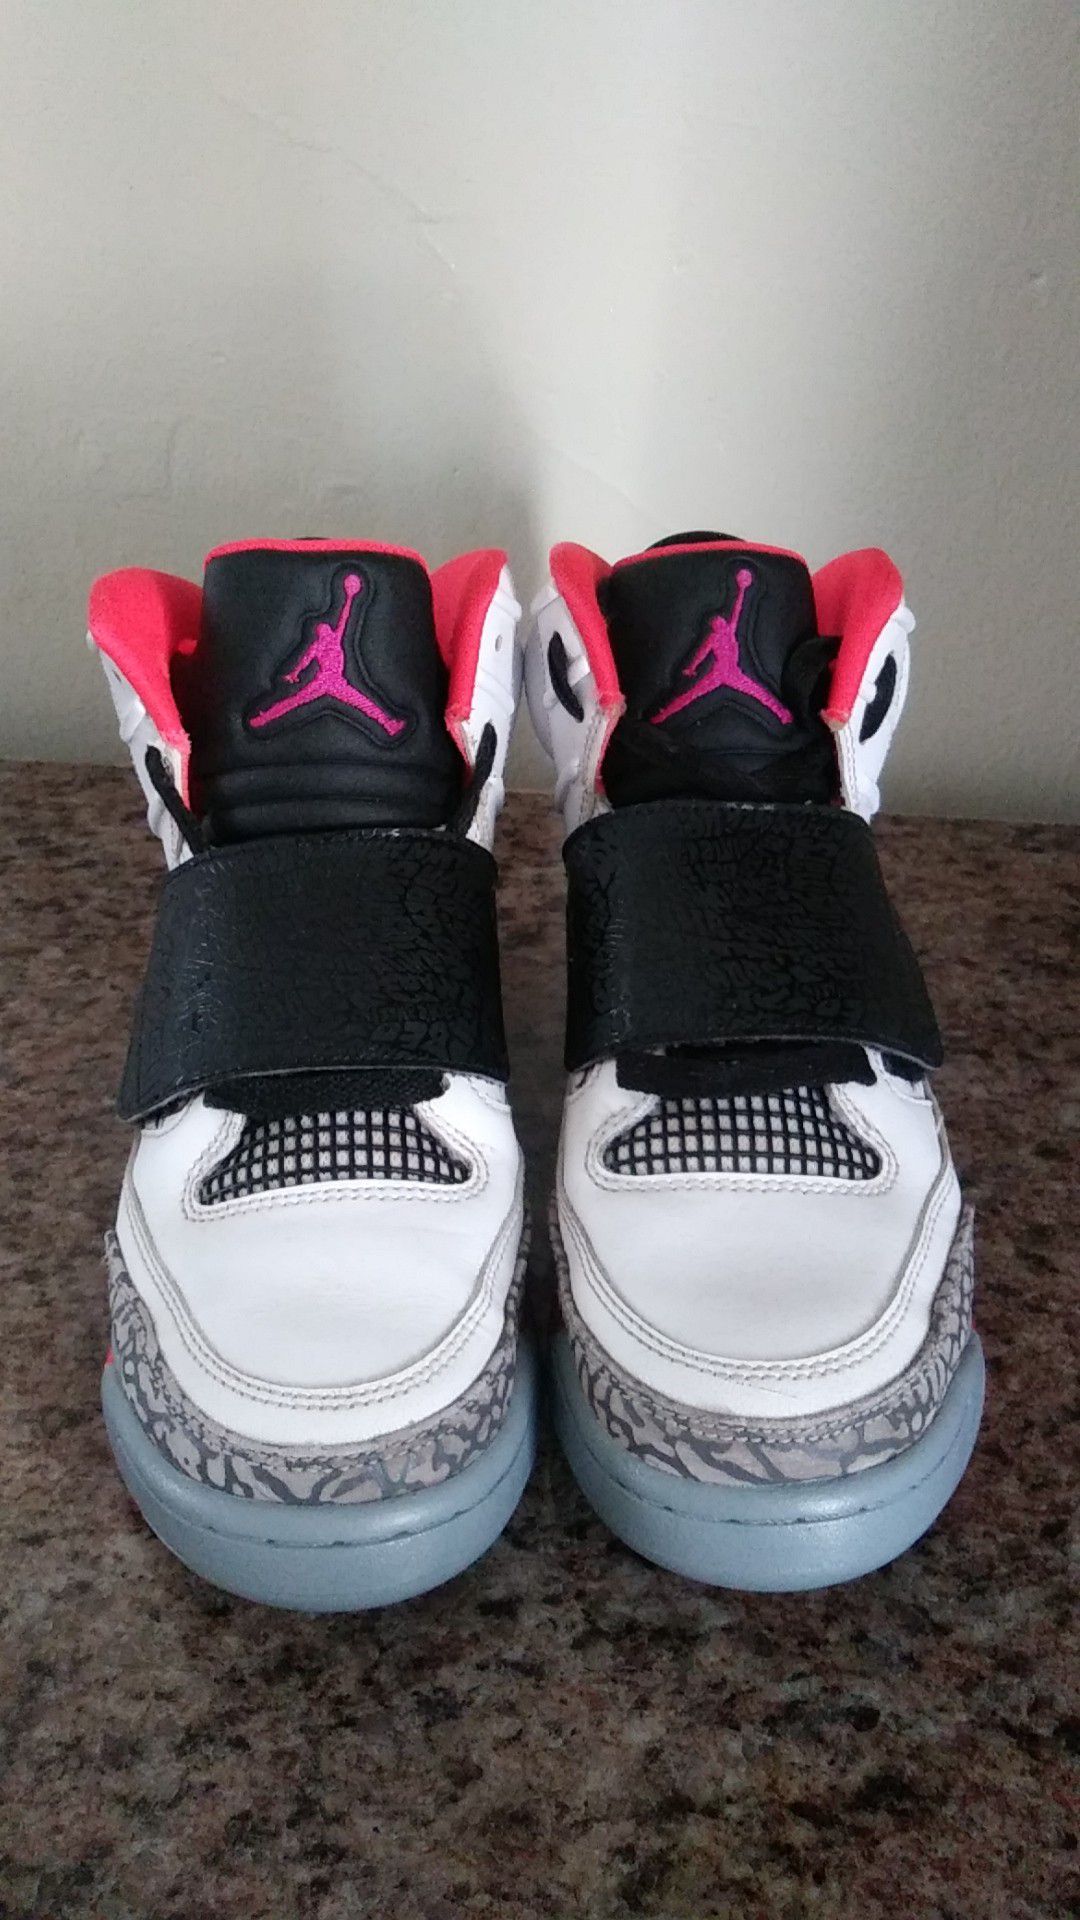 Two pairs for one price Boys white and gray infrared Jordans boys size 5.5 youth